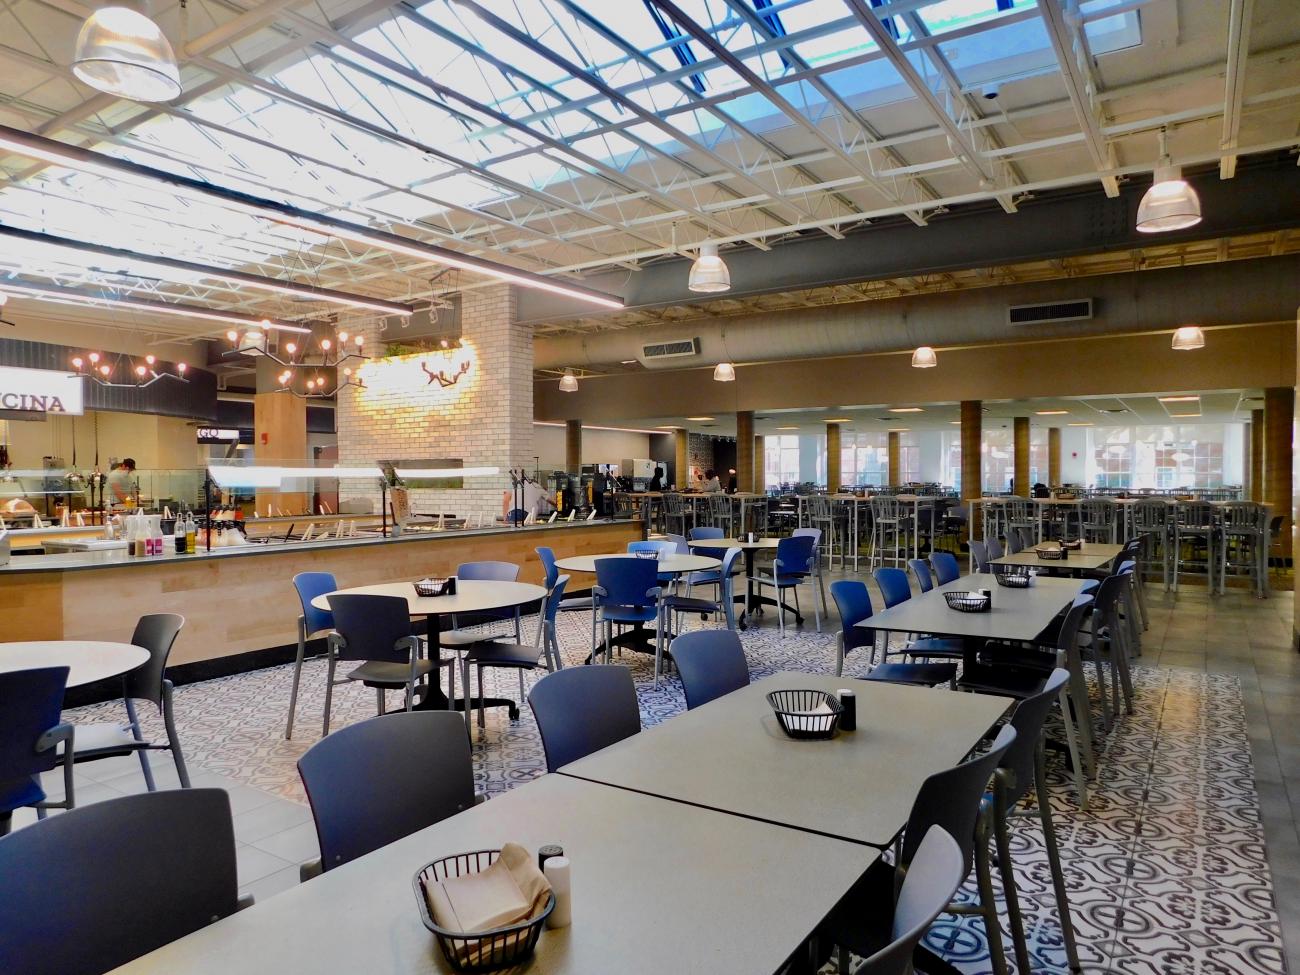 Shively Dining Hall